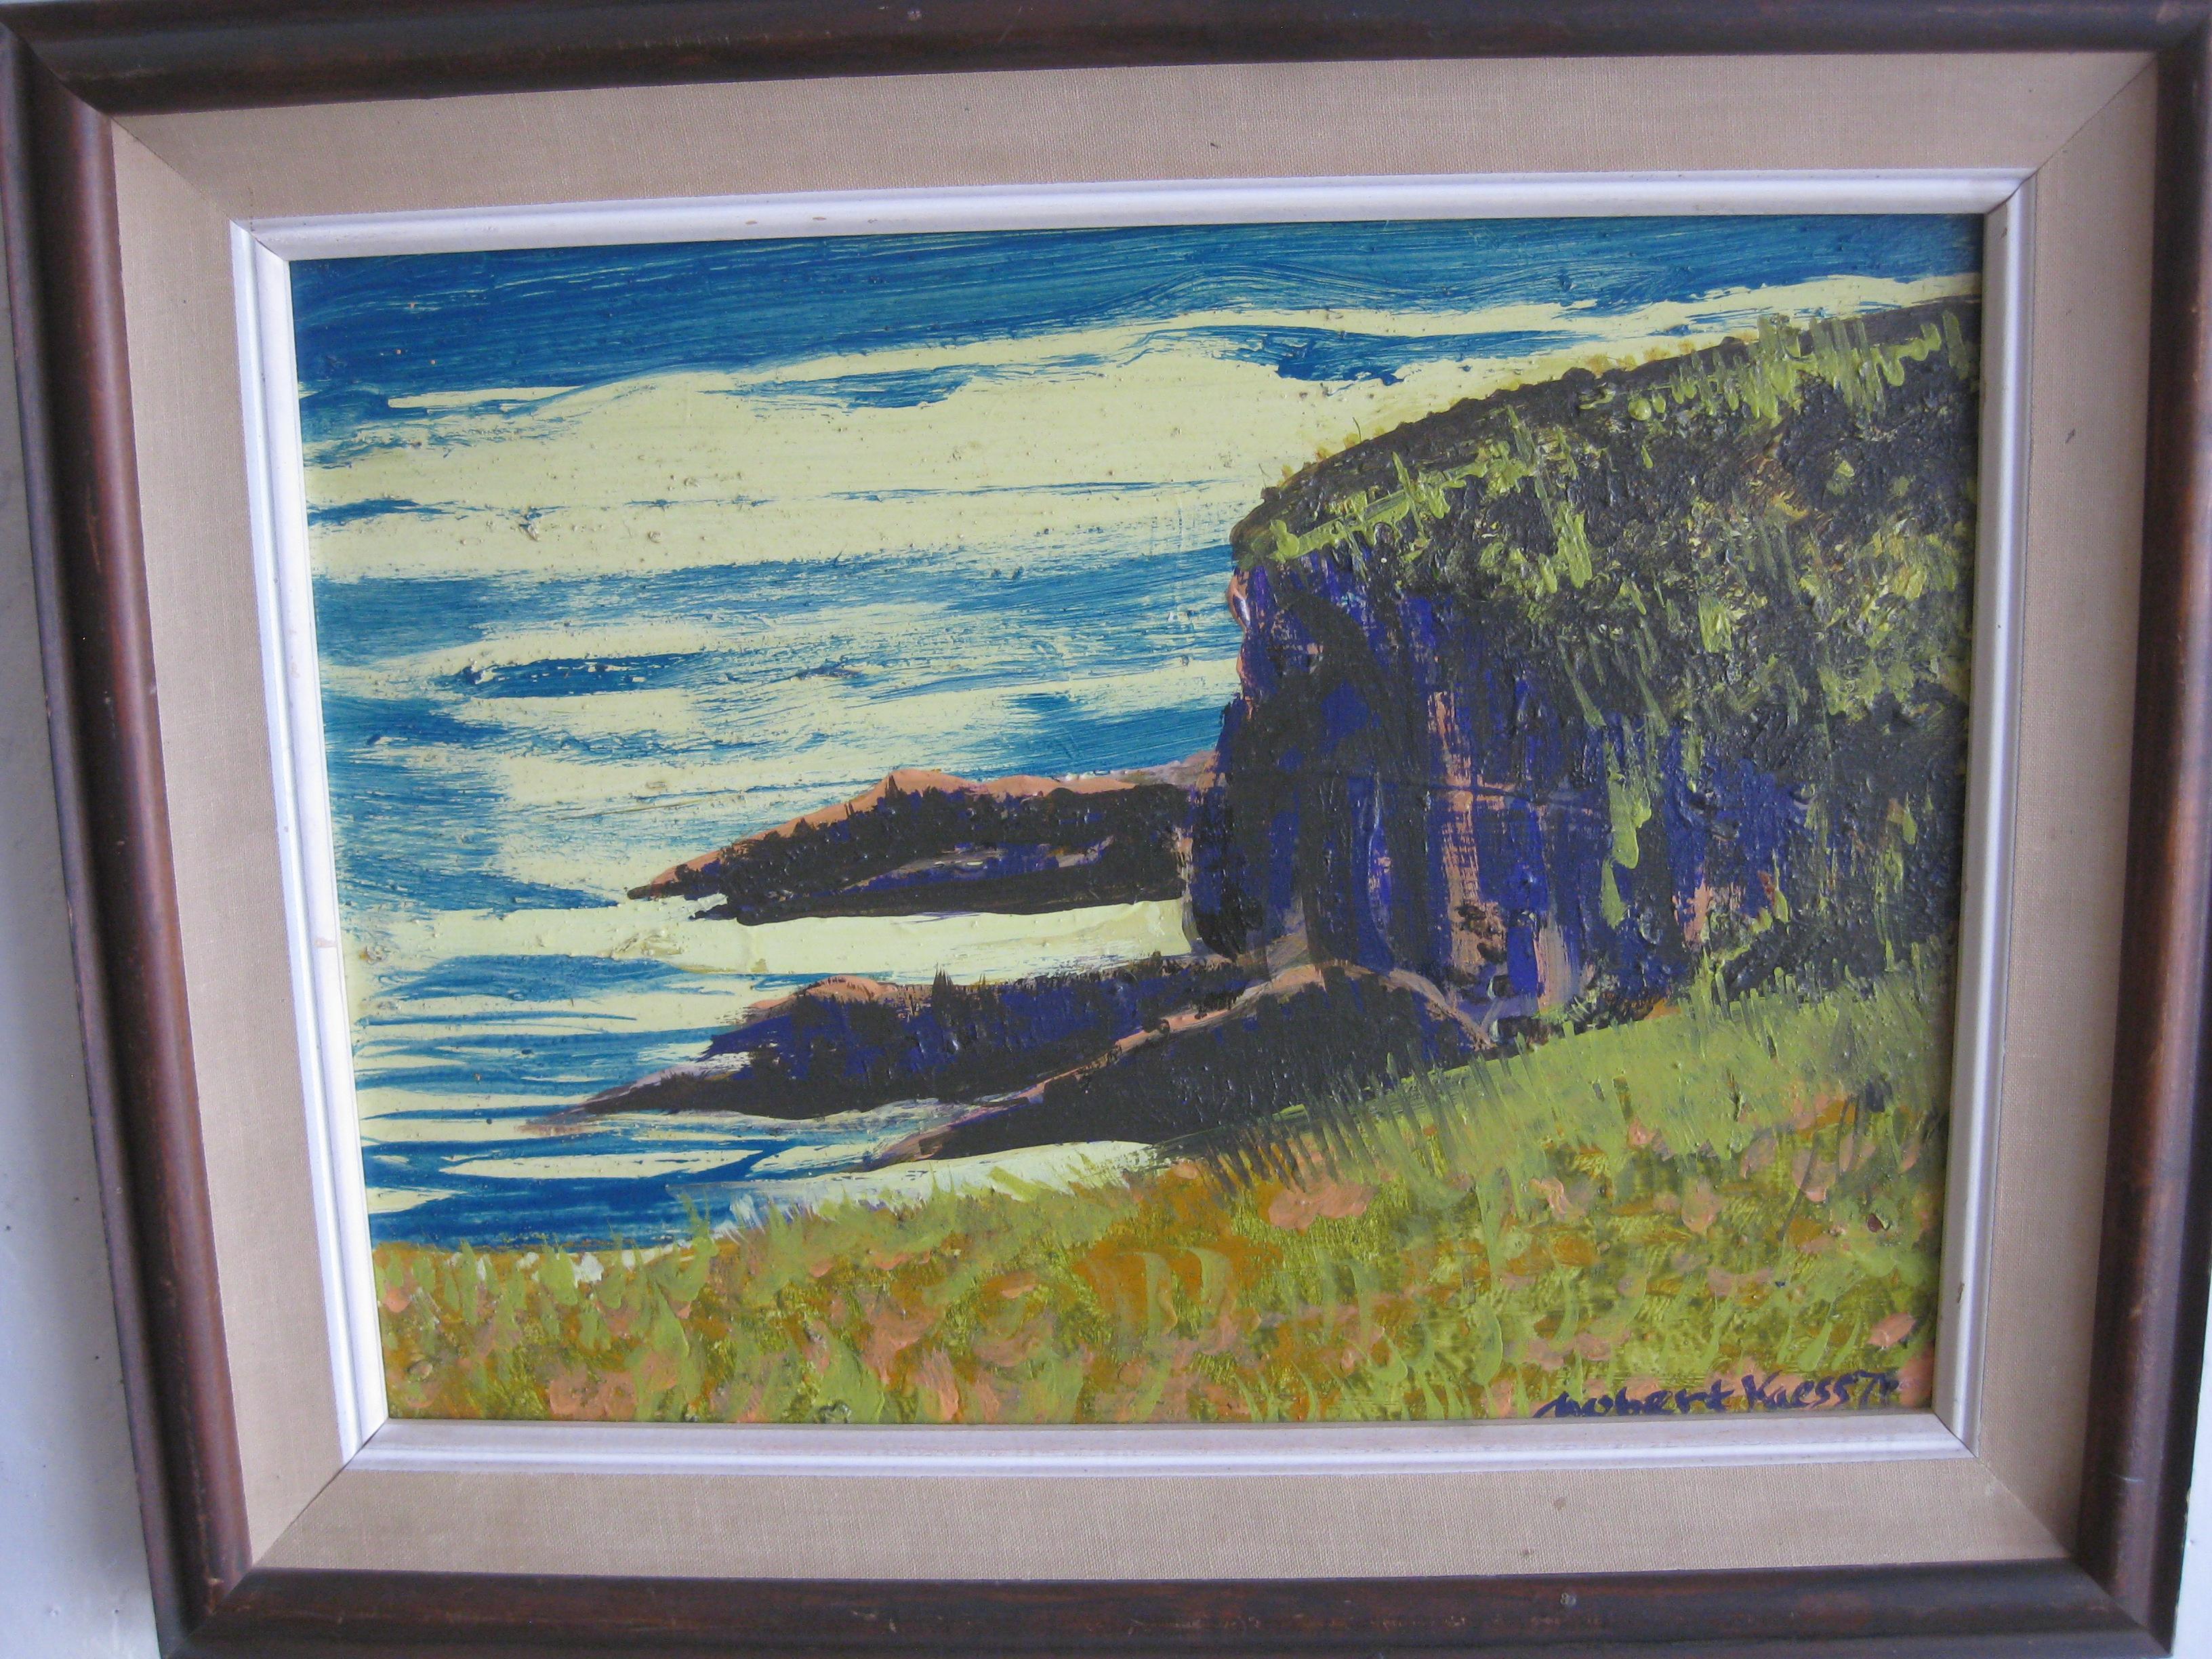 Beautiful abstract oil painting by California Listed Artist Robert Kaess, and dates from 1971. The painting is on masonite board and is of the ocean and cliffs. Probably from Northern California. In its original frame. Great colors and in excellent